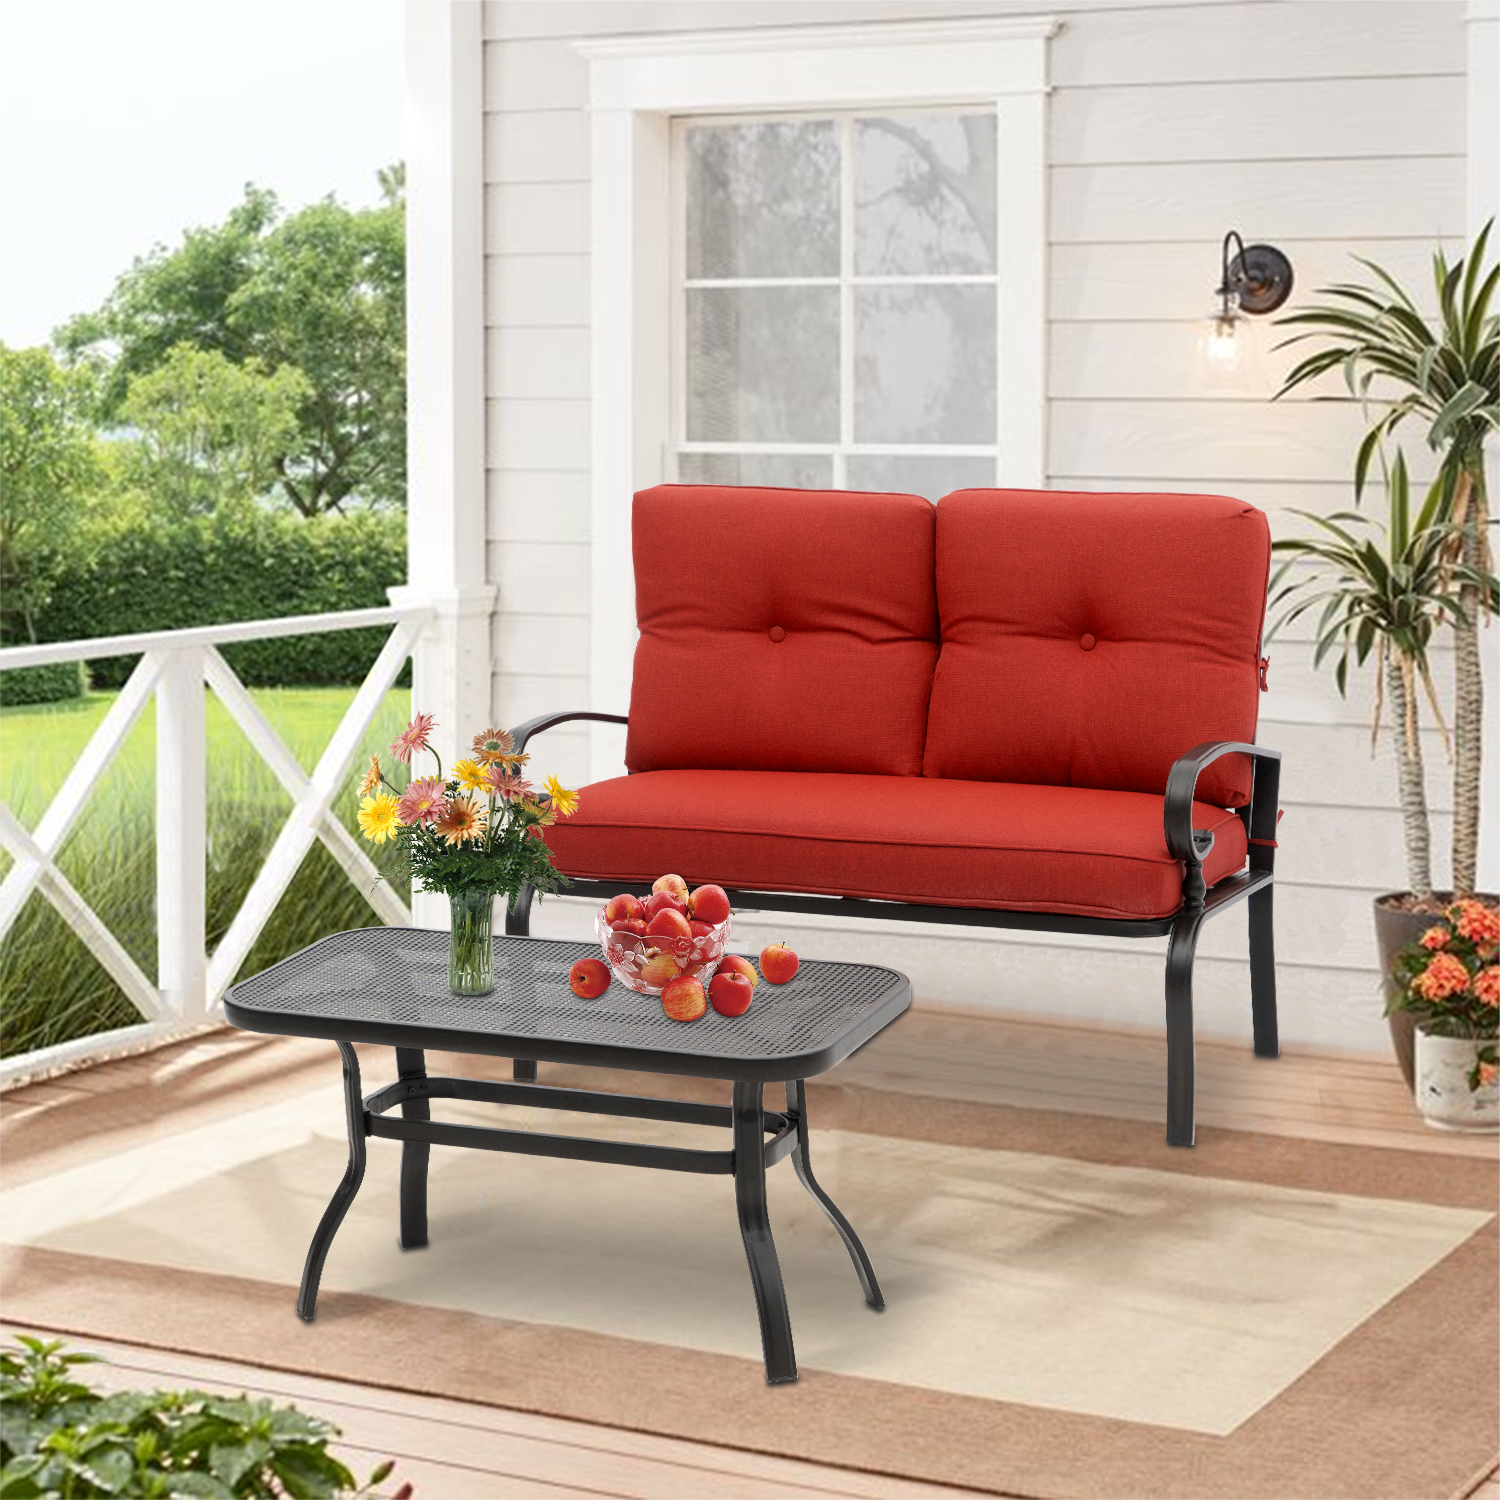 SUNCROWN 2-Piece Patio Furniture Outdoor Loveseat Set Wrought Iron Frame Bench Sofa with Coffee Table, Red - image 1 of 6